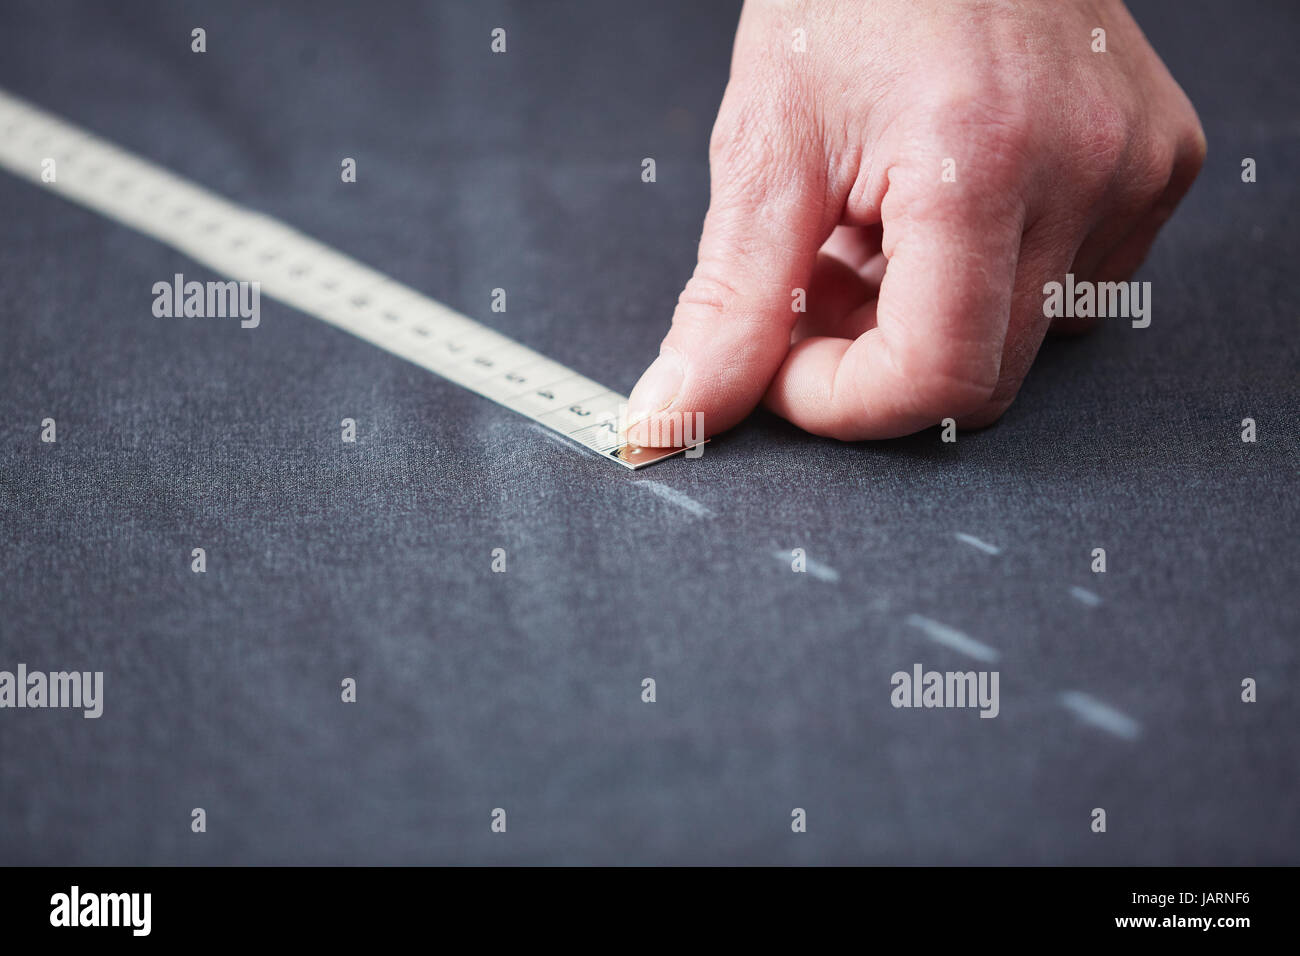 Tailors Hand Measuring Fabric on Table Stock Photo